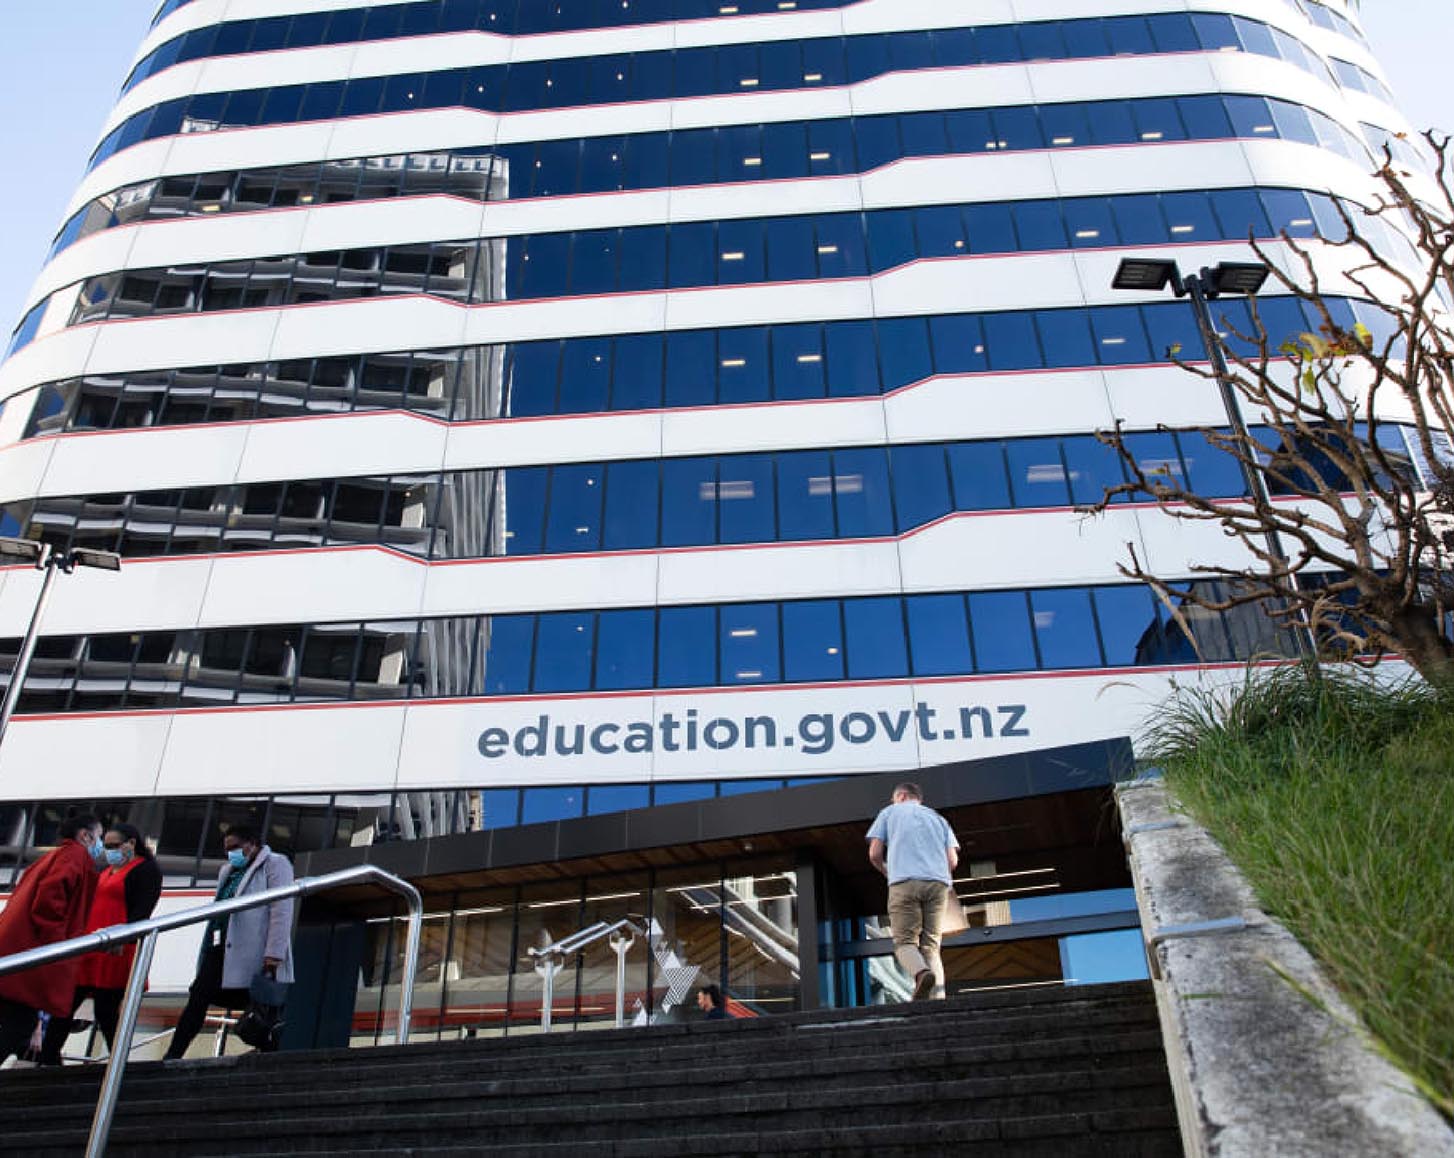 Looking up at a high-rise building labelled with the New Zealand Ministry of Education's website address